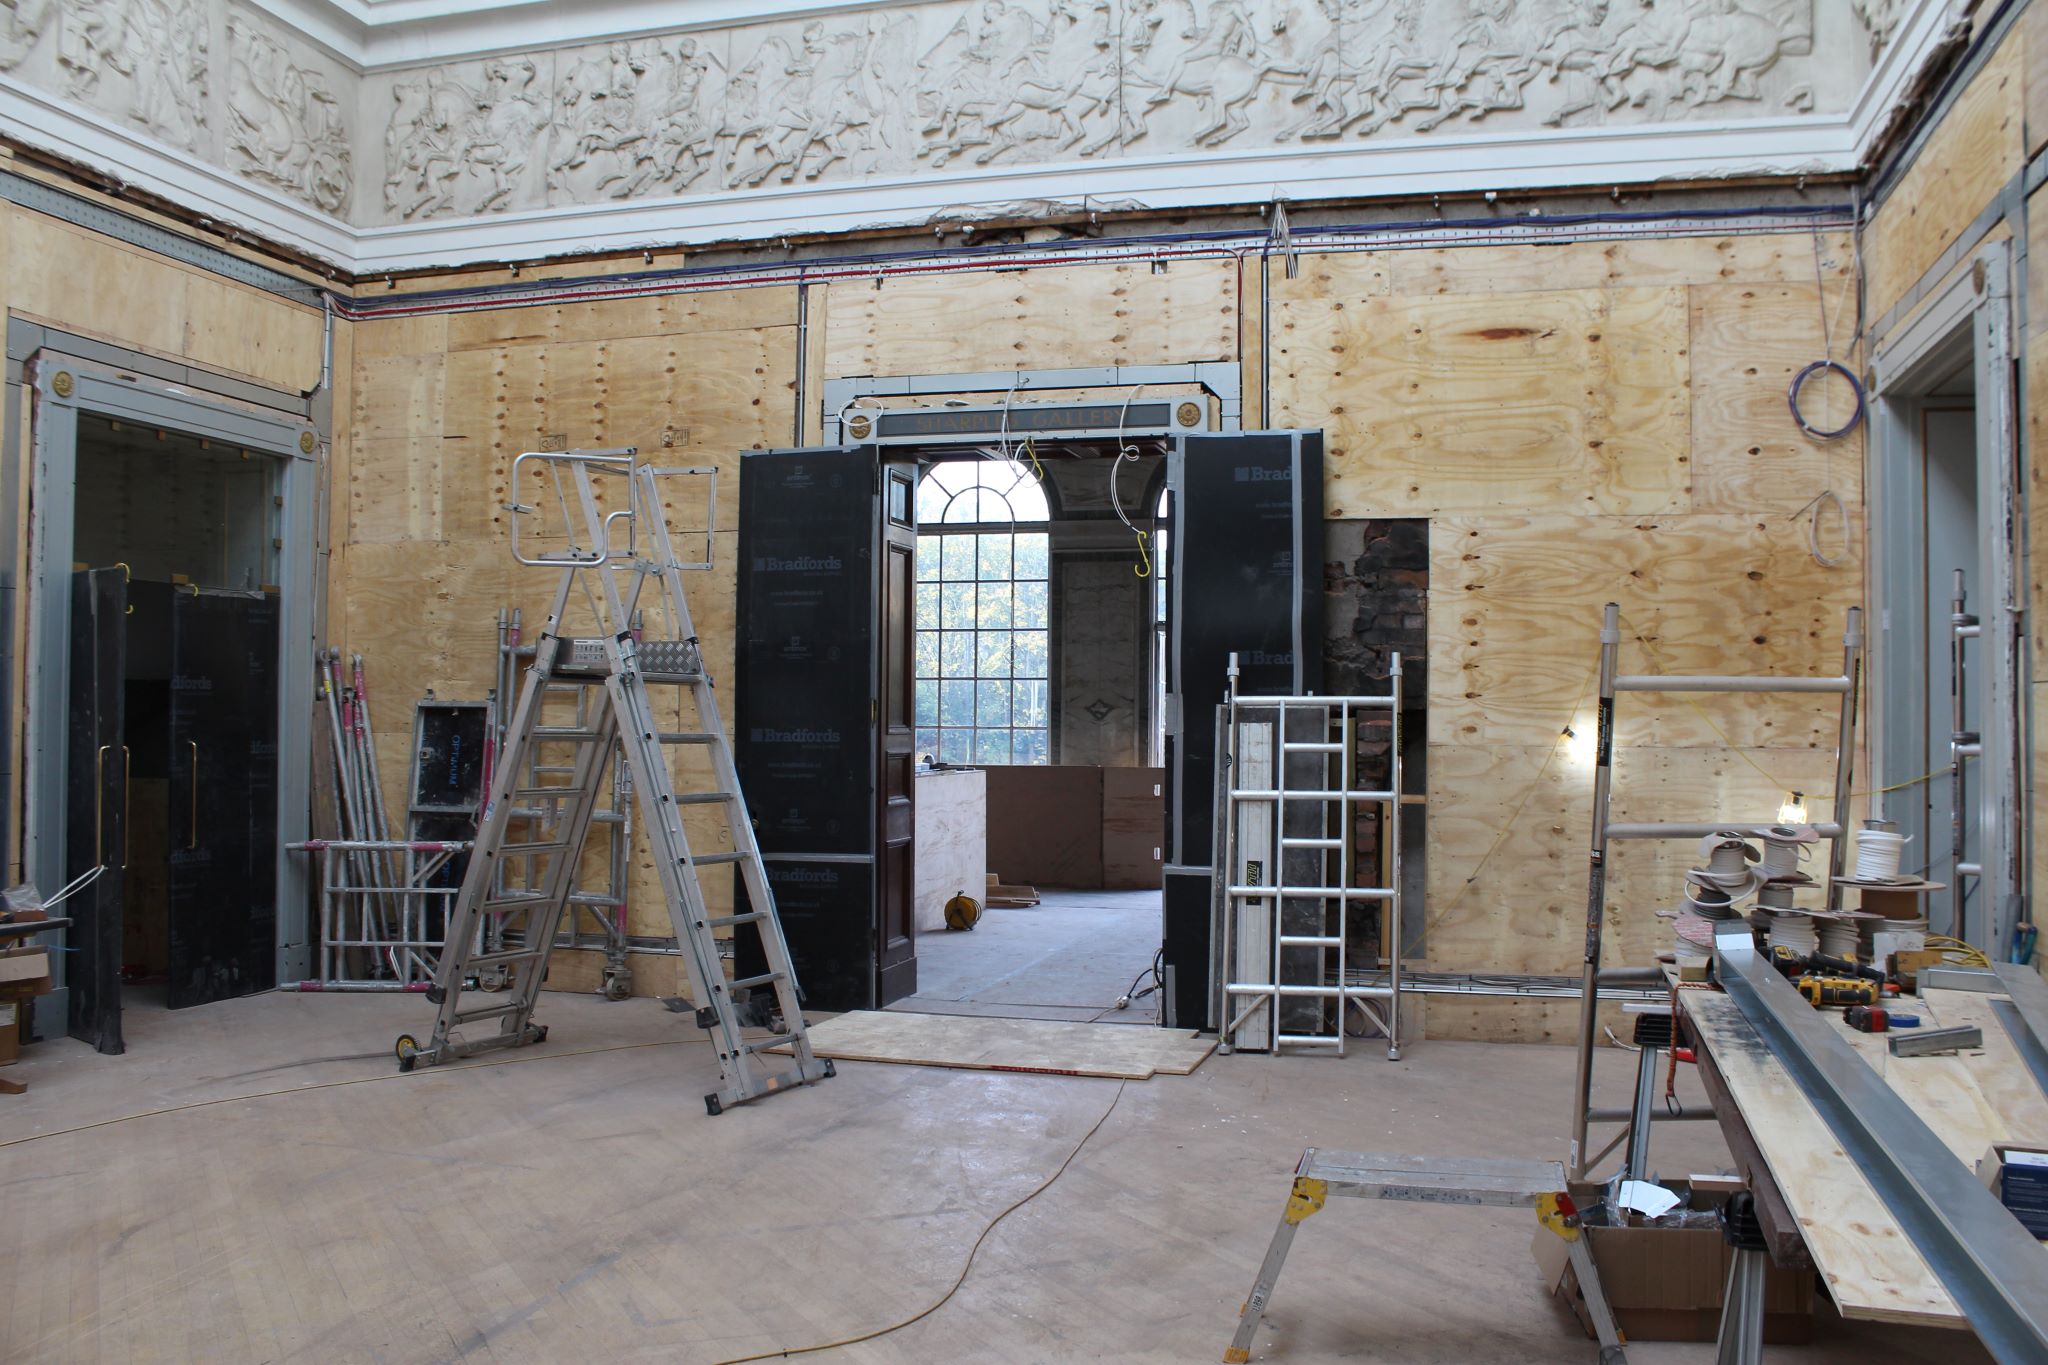 Inside the RWA gallery space with ladder and building materials, a bright window provides light at the far side 